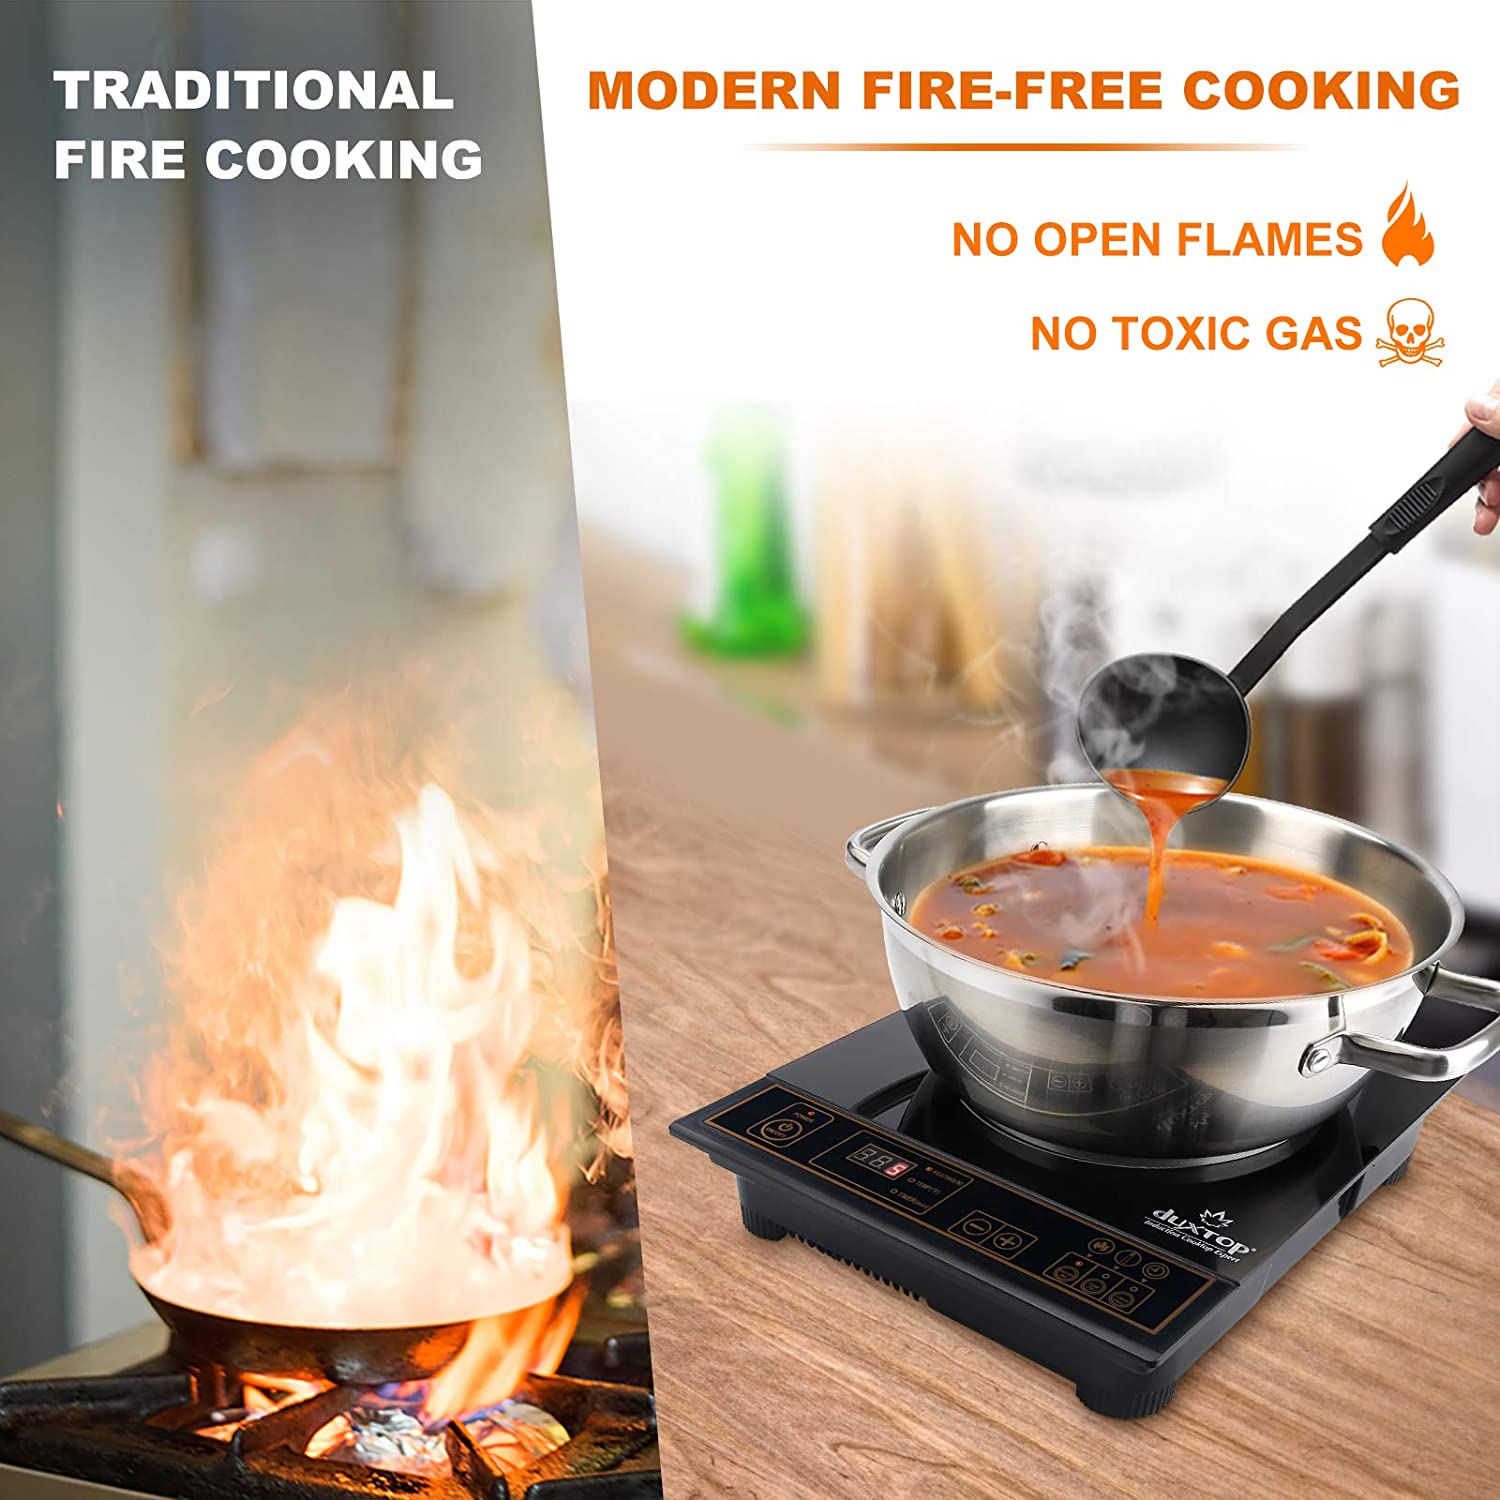 https://bigbigmart.com/wp-content/uploads/2023/07/Duxtop-1800W-Portable-Induction-Cooktop-Countertop-Burner-Included-5.7-Quarts-Professional-Stainless-Steel-Cooking-Pot-with-Lid-Heavy-Impact-bonded-Bottom3.jpg